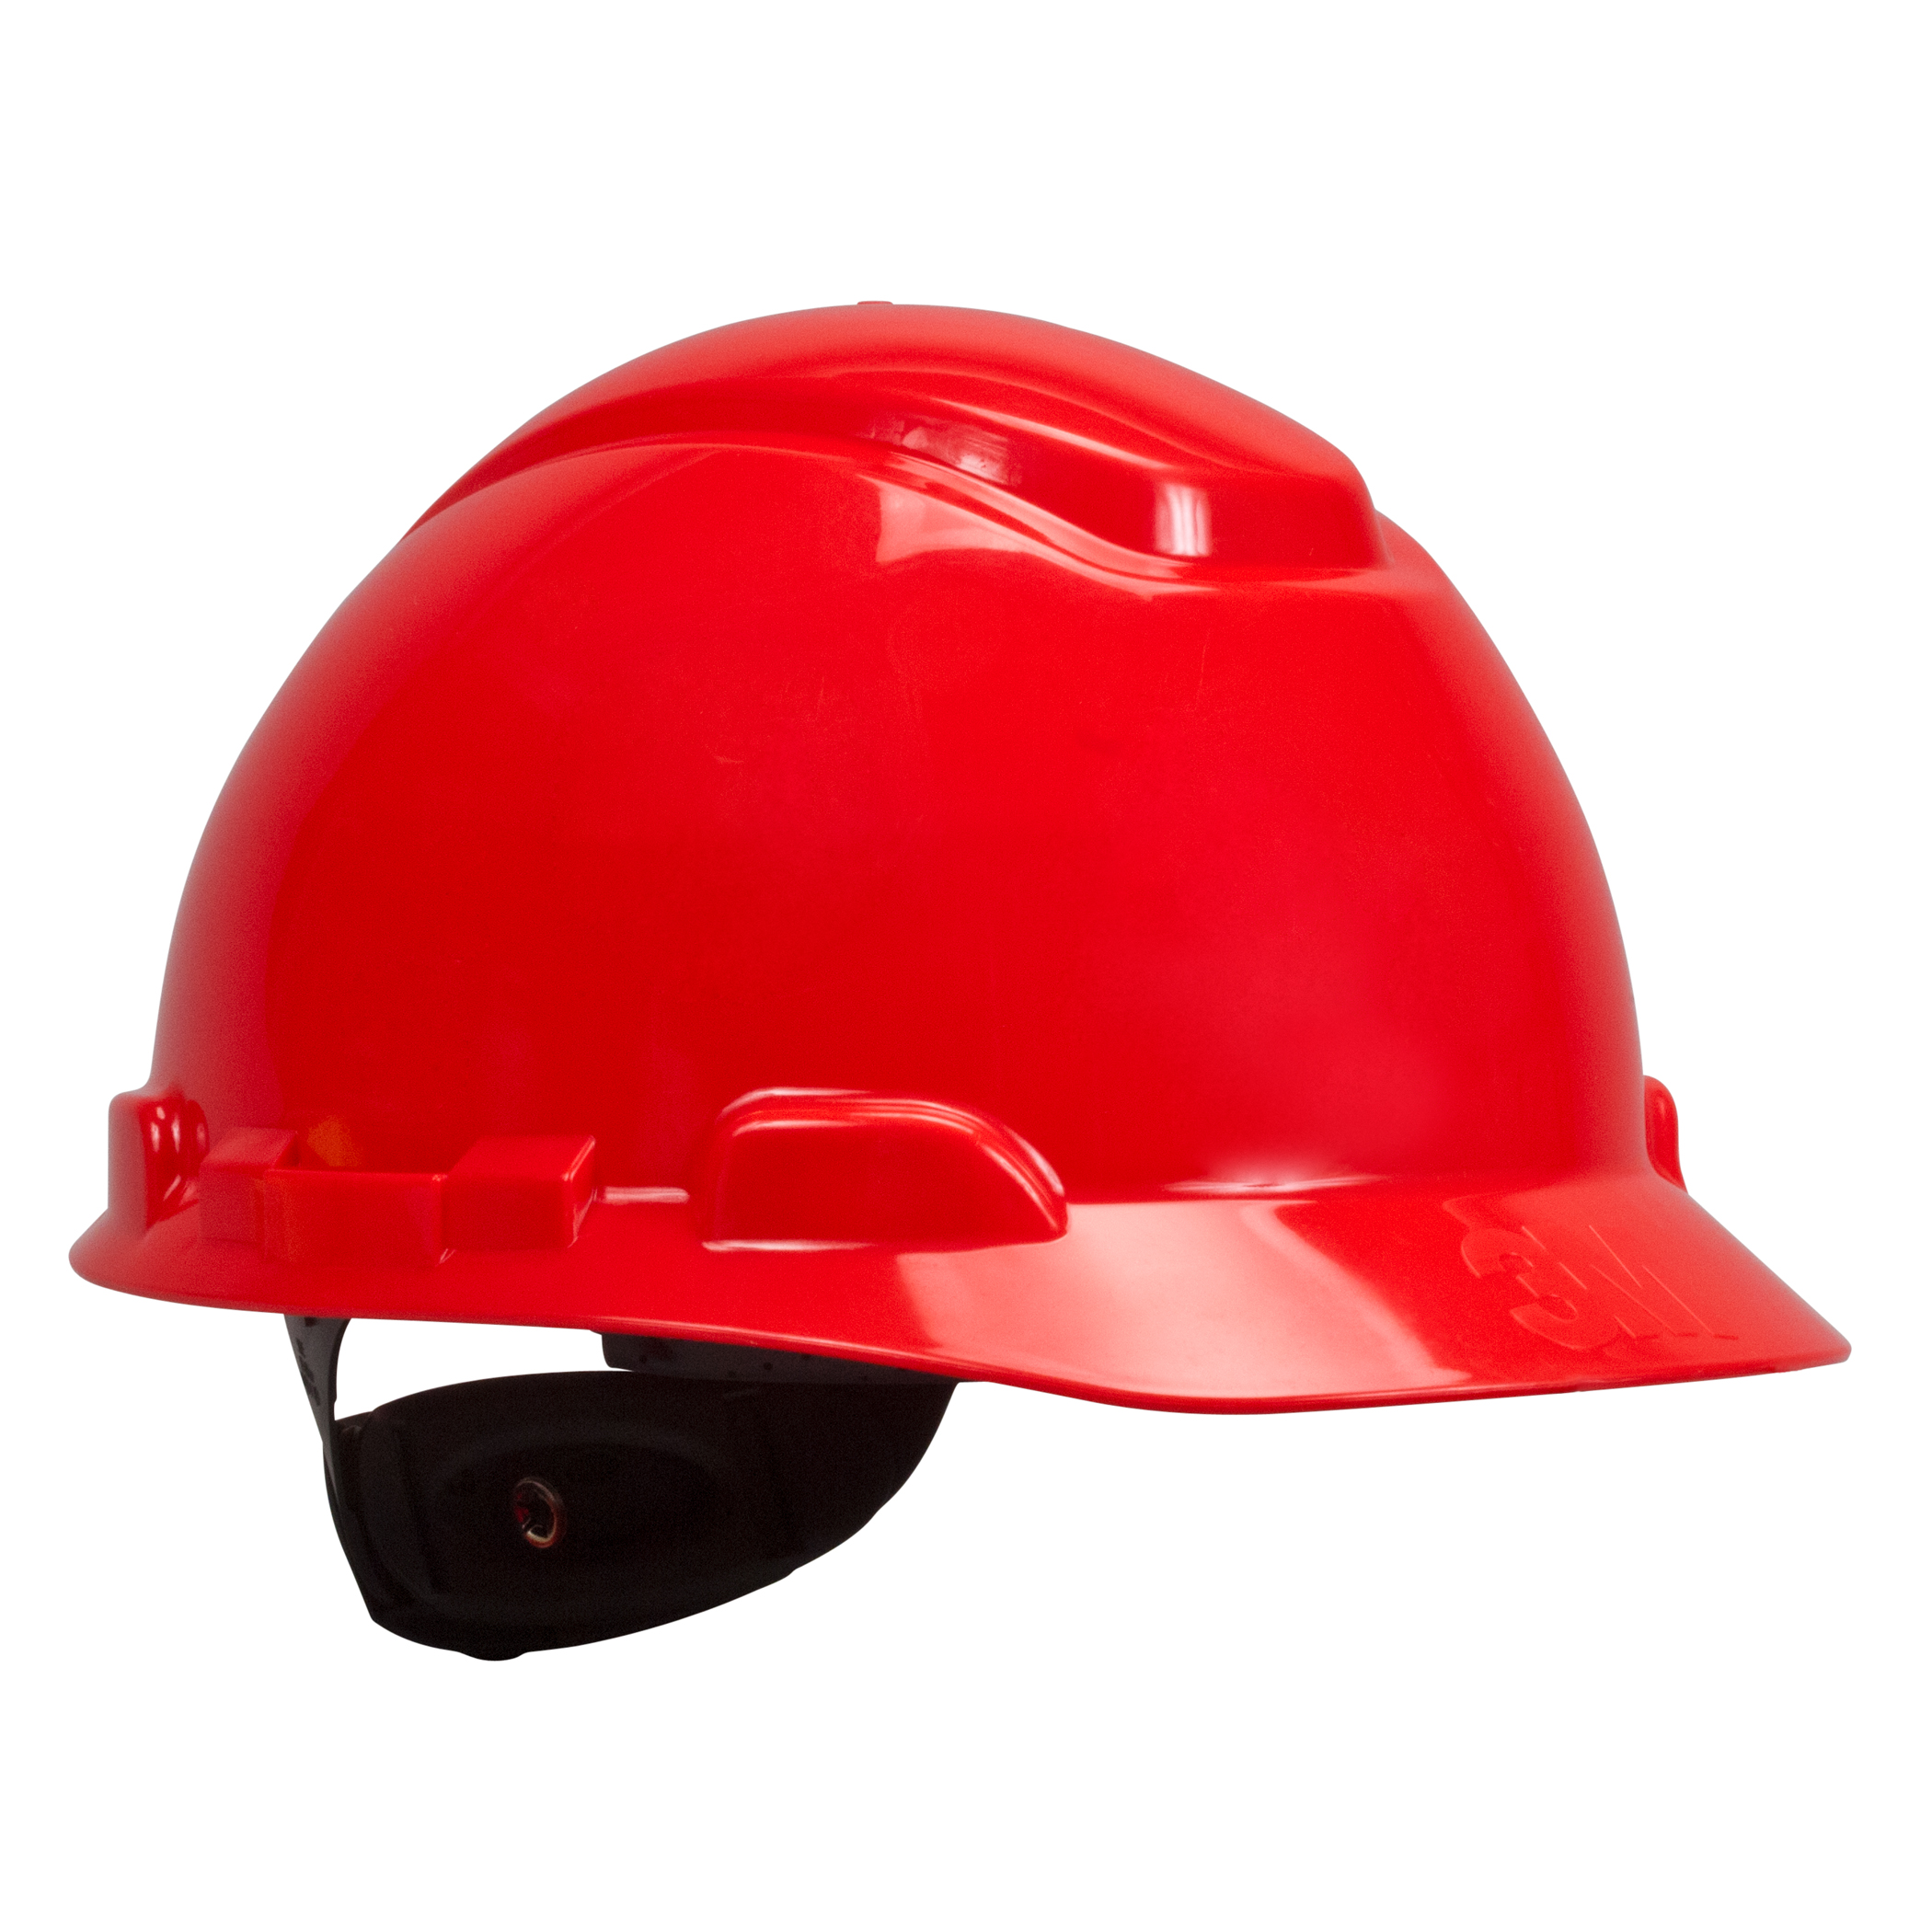 3M 700 Series 4-Point Ratchet Suspension Hard Hat from Columbia Safety